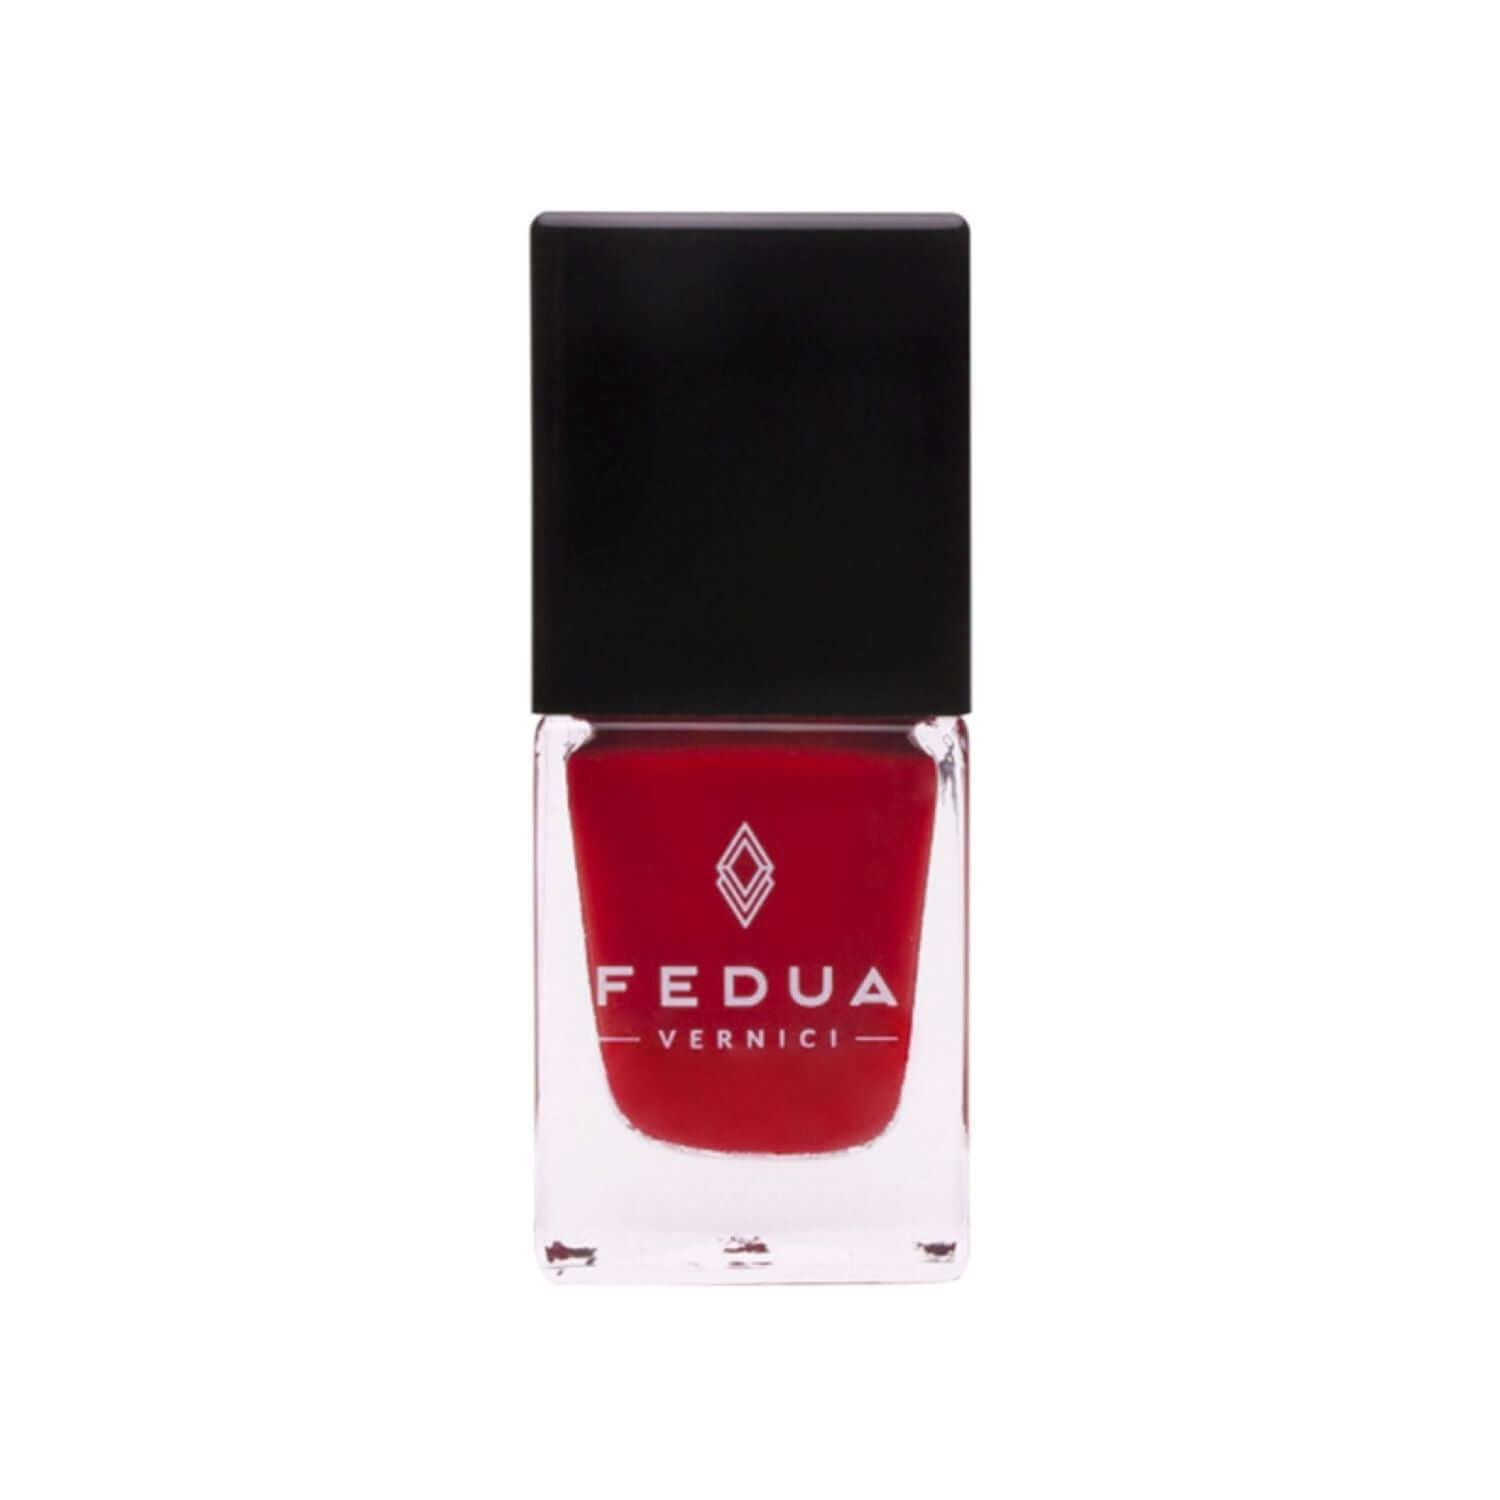 Currant Red Nail Polish Can Box - Beauty Ethic